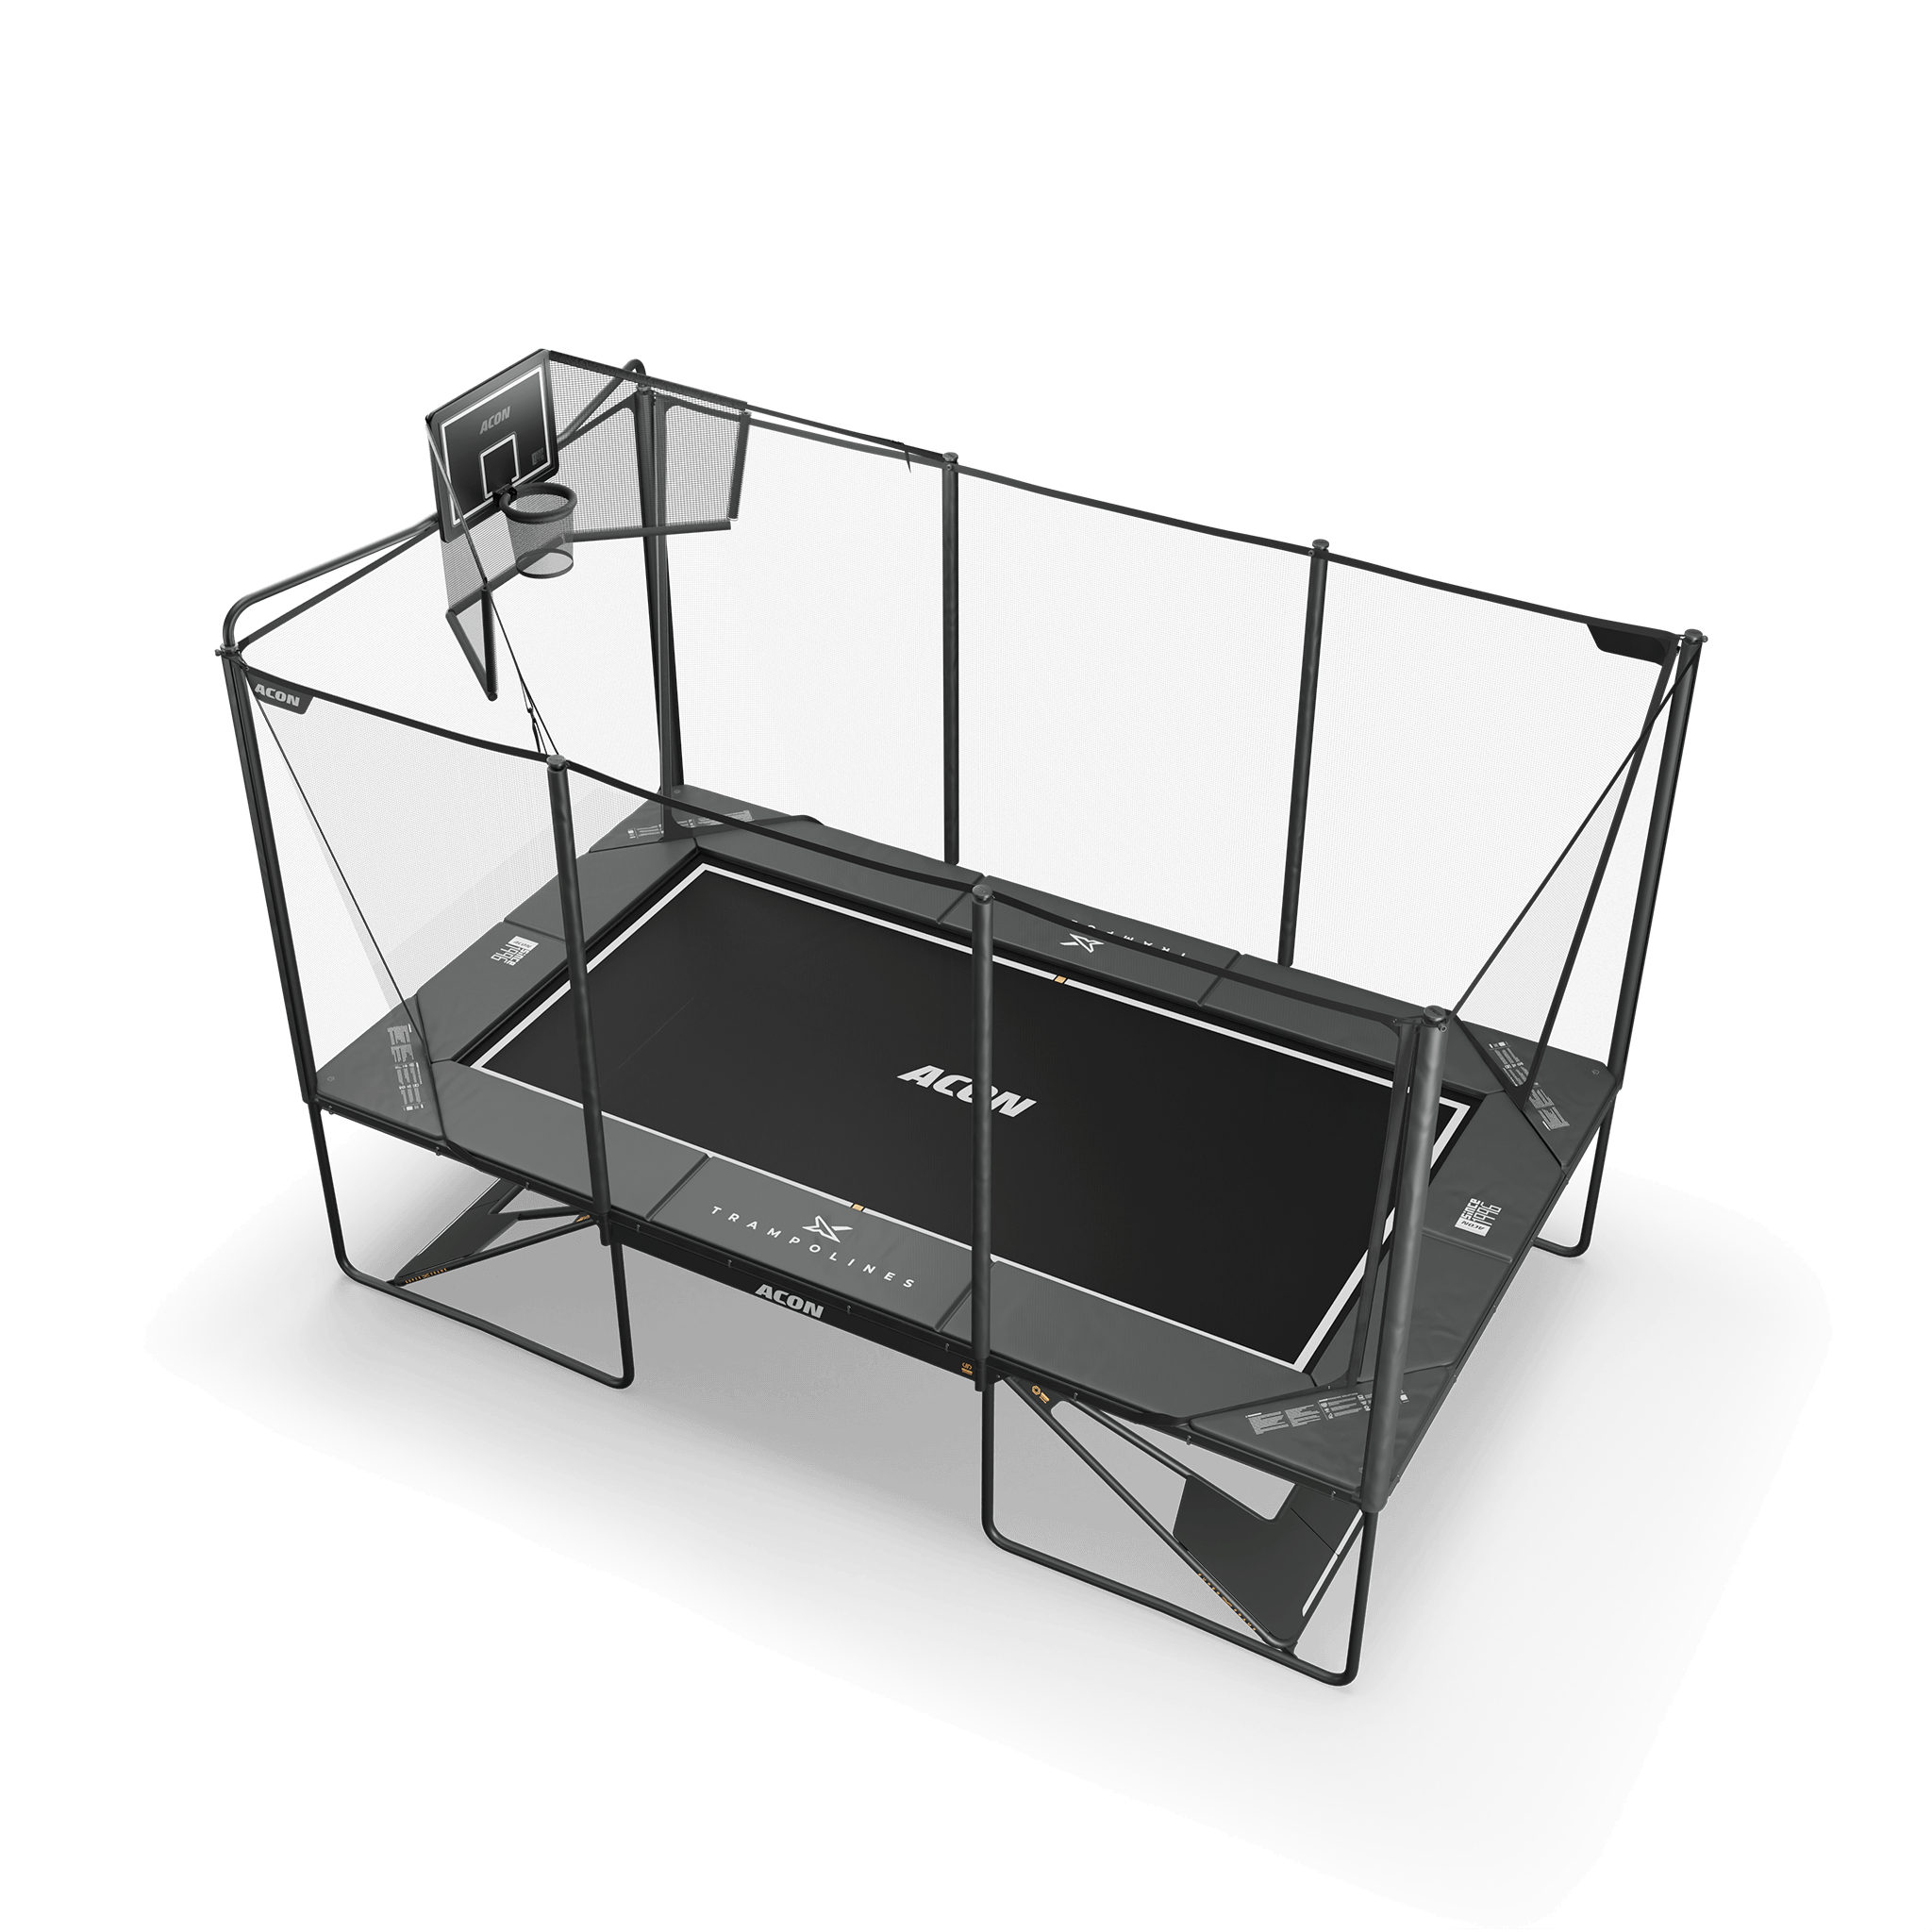 Acon X 17ft Rectangular Trampoline with Acon X Basketball Hoop and Back Net.